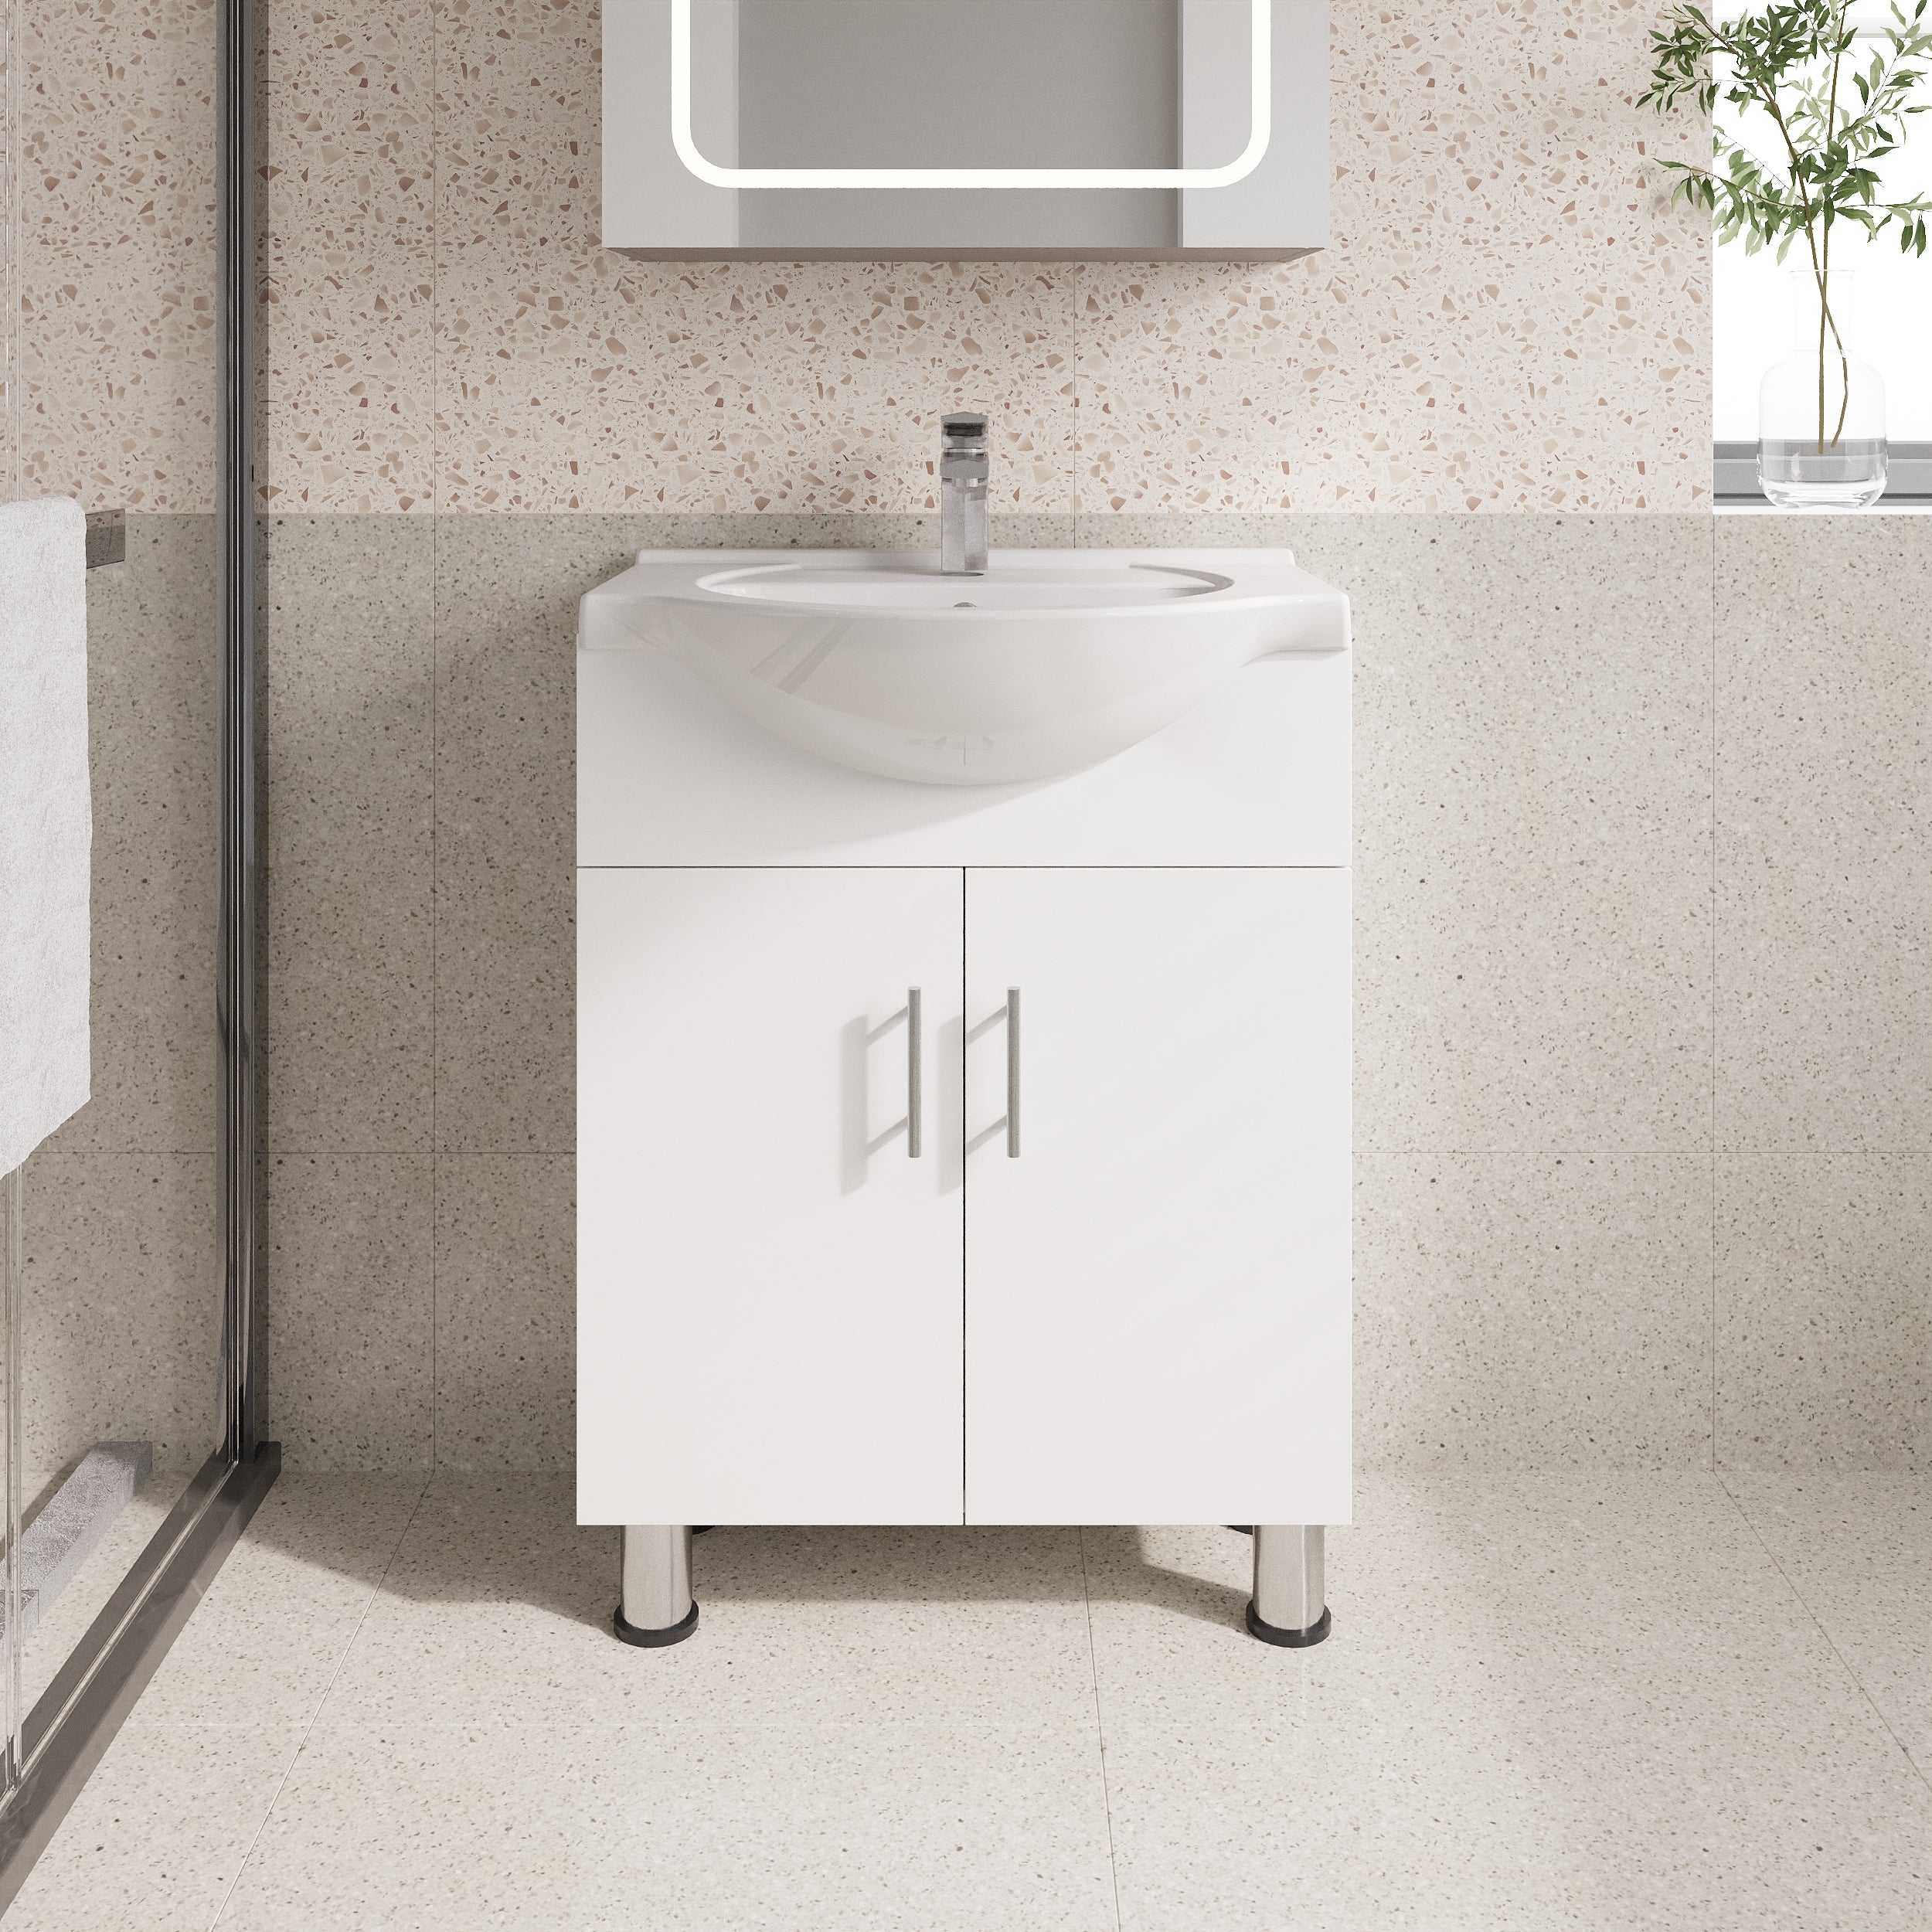 Lilly 24" W x 18" D x 34" H Euro-Style Vanity in White with Ceramic Vanity Top